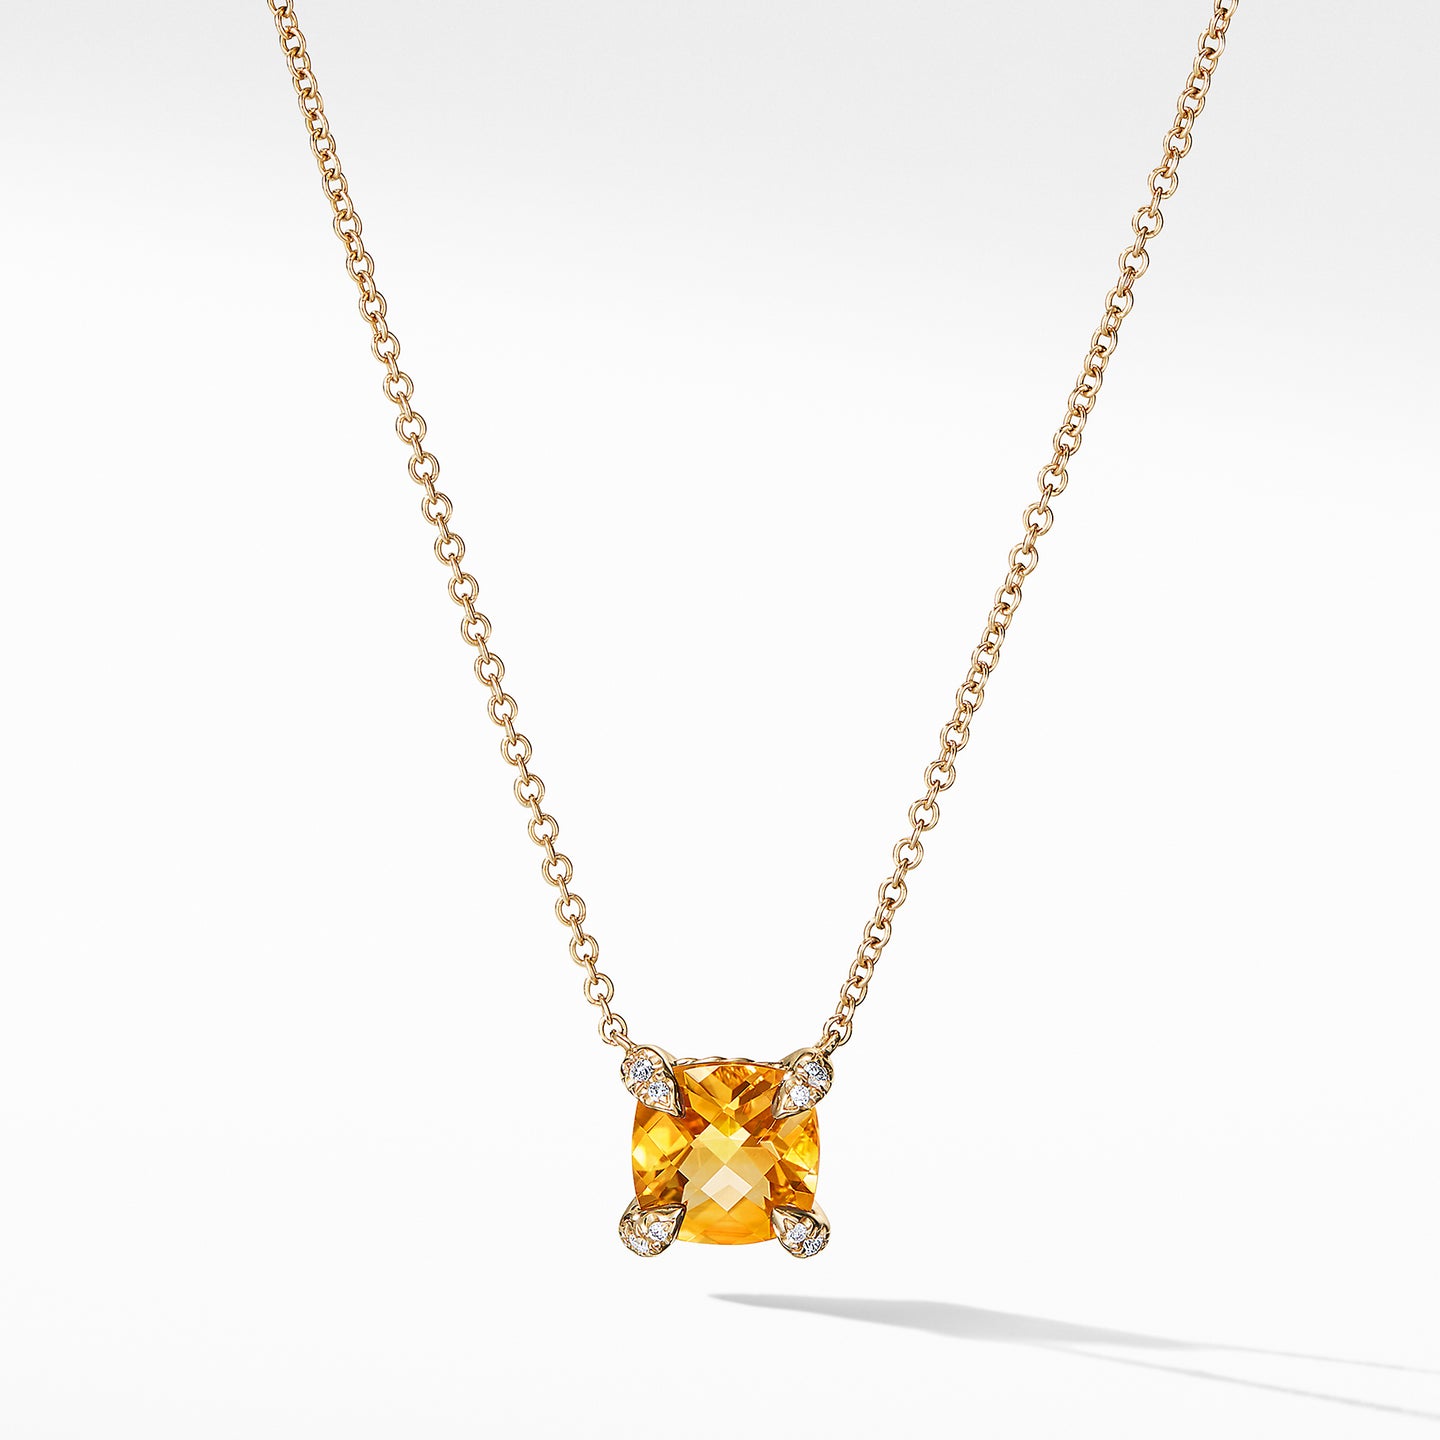 Necklace with Citrine and Diamonds in 18K Gold, 18